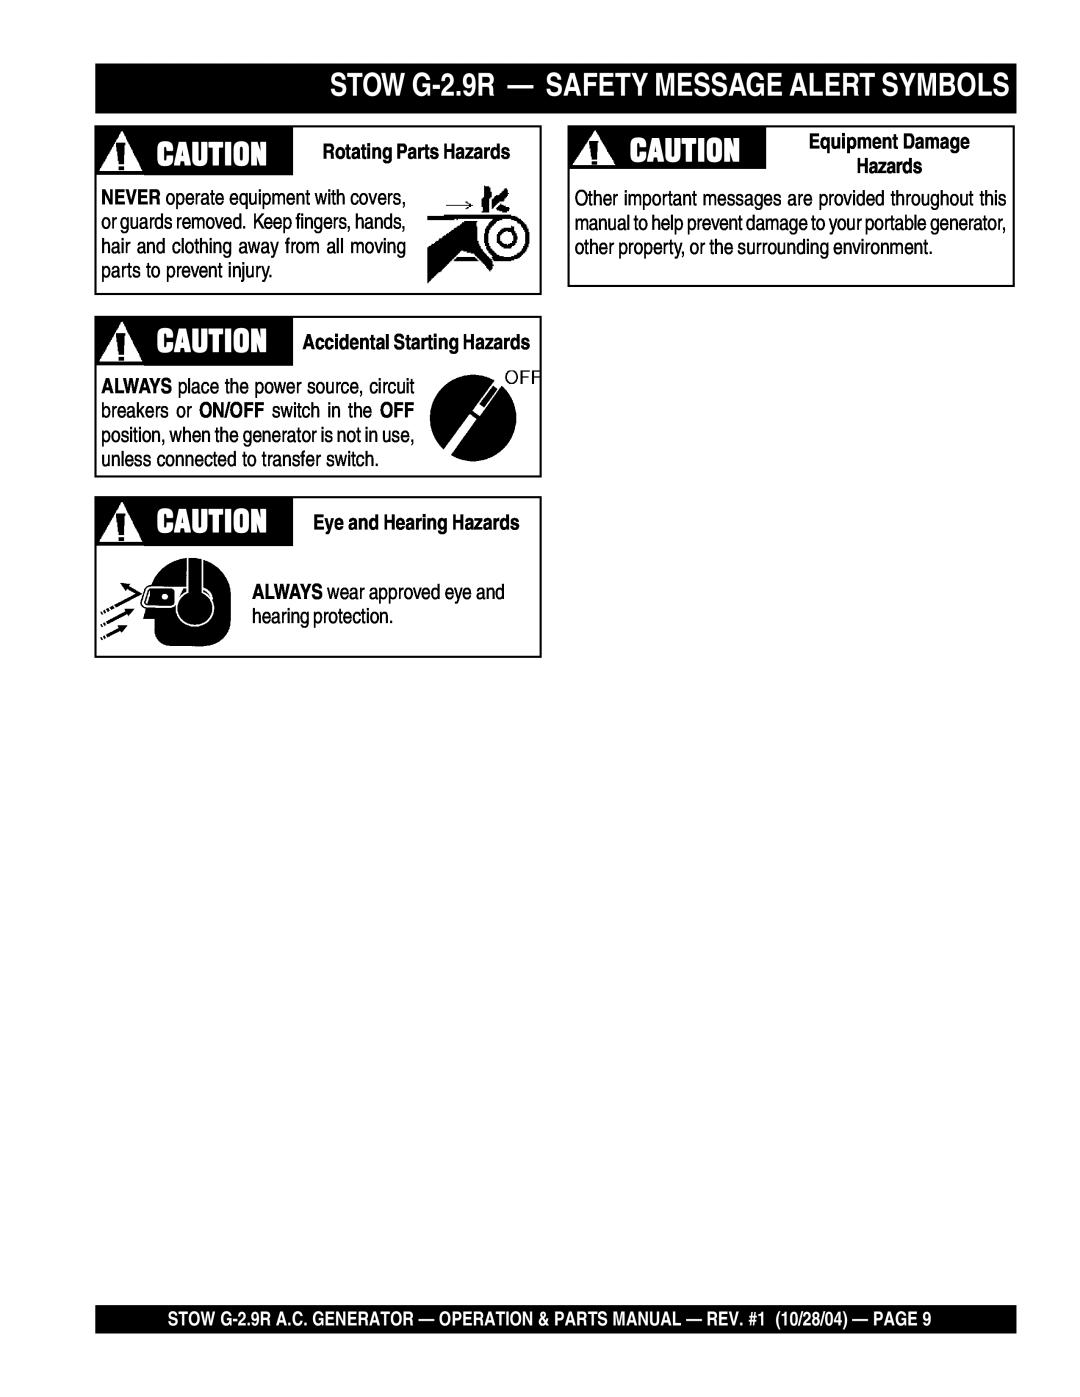 Stow manual STOW G-2.9R - SAFETY MESSAGE ALERT SYMBOLS, CAUTION Eye and Hearing Hazards, Equipment Damage 